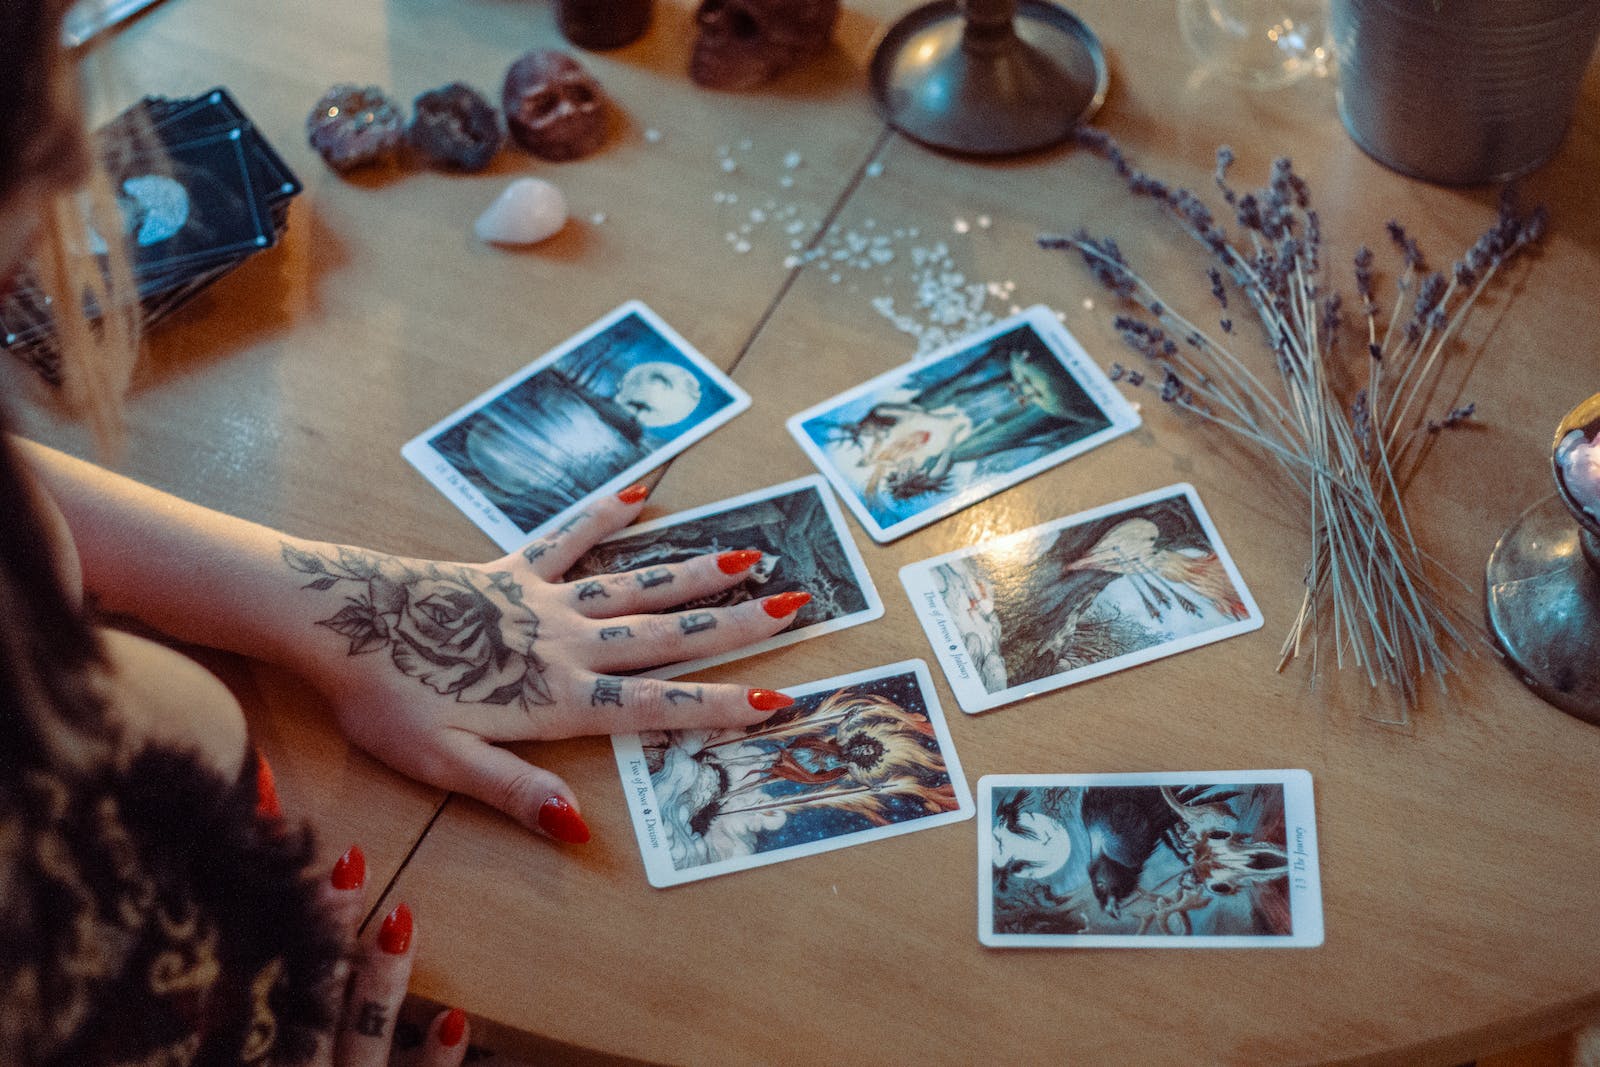 Fortune teller with tattoos on her hand and tarot cards on the table.